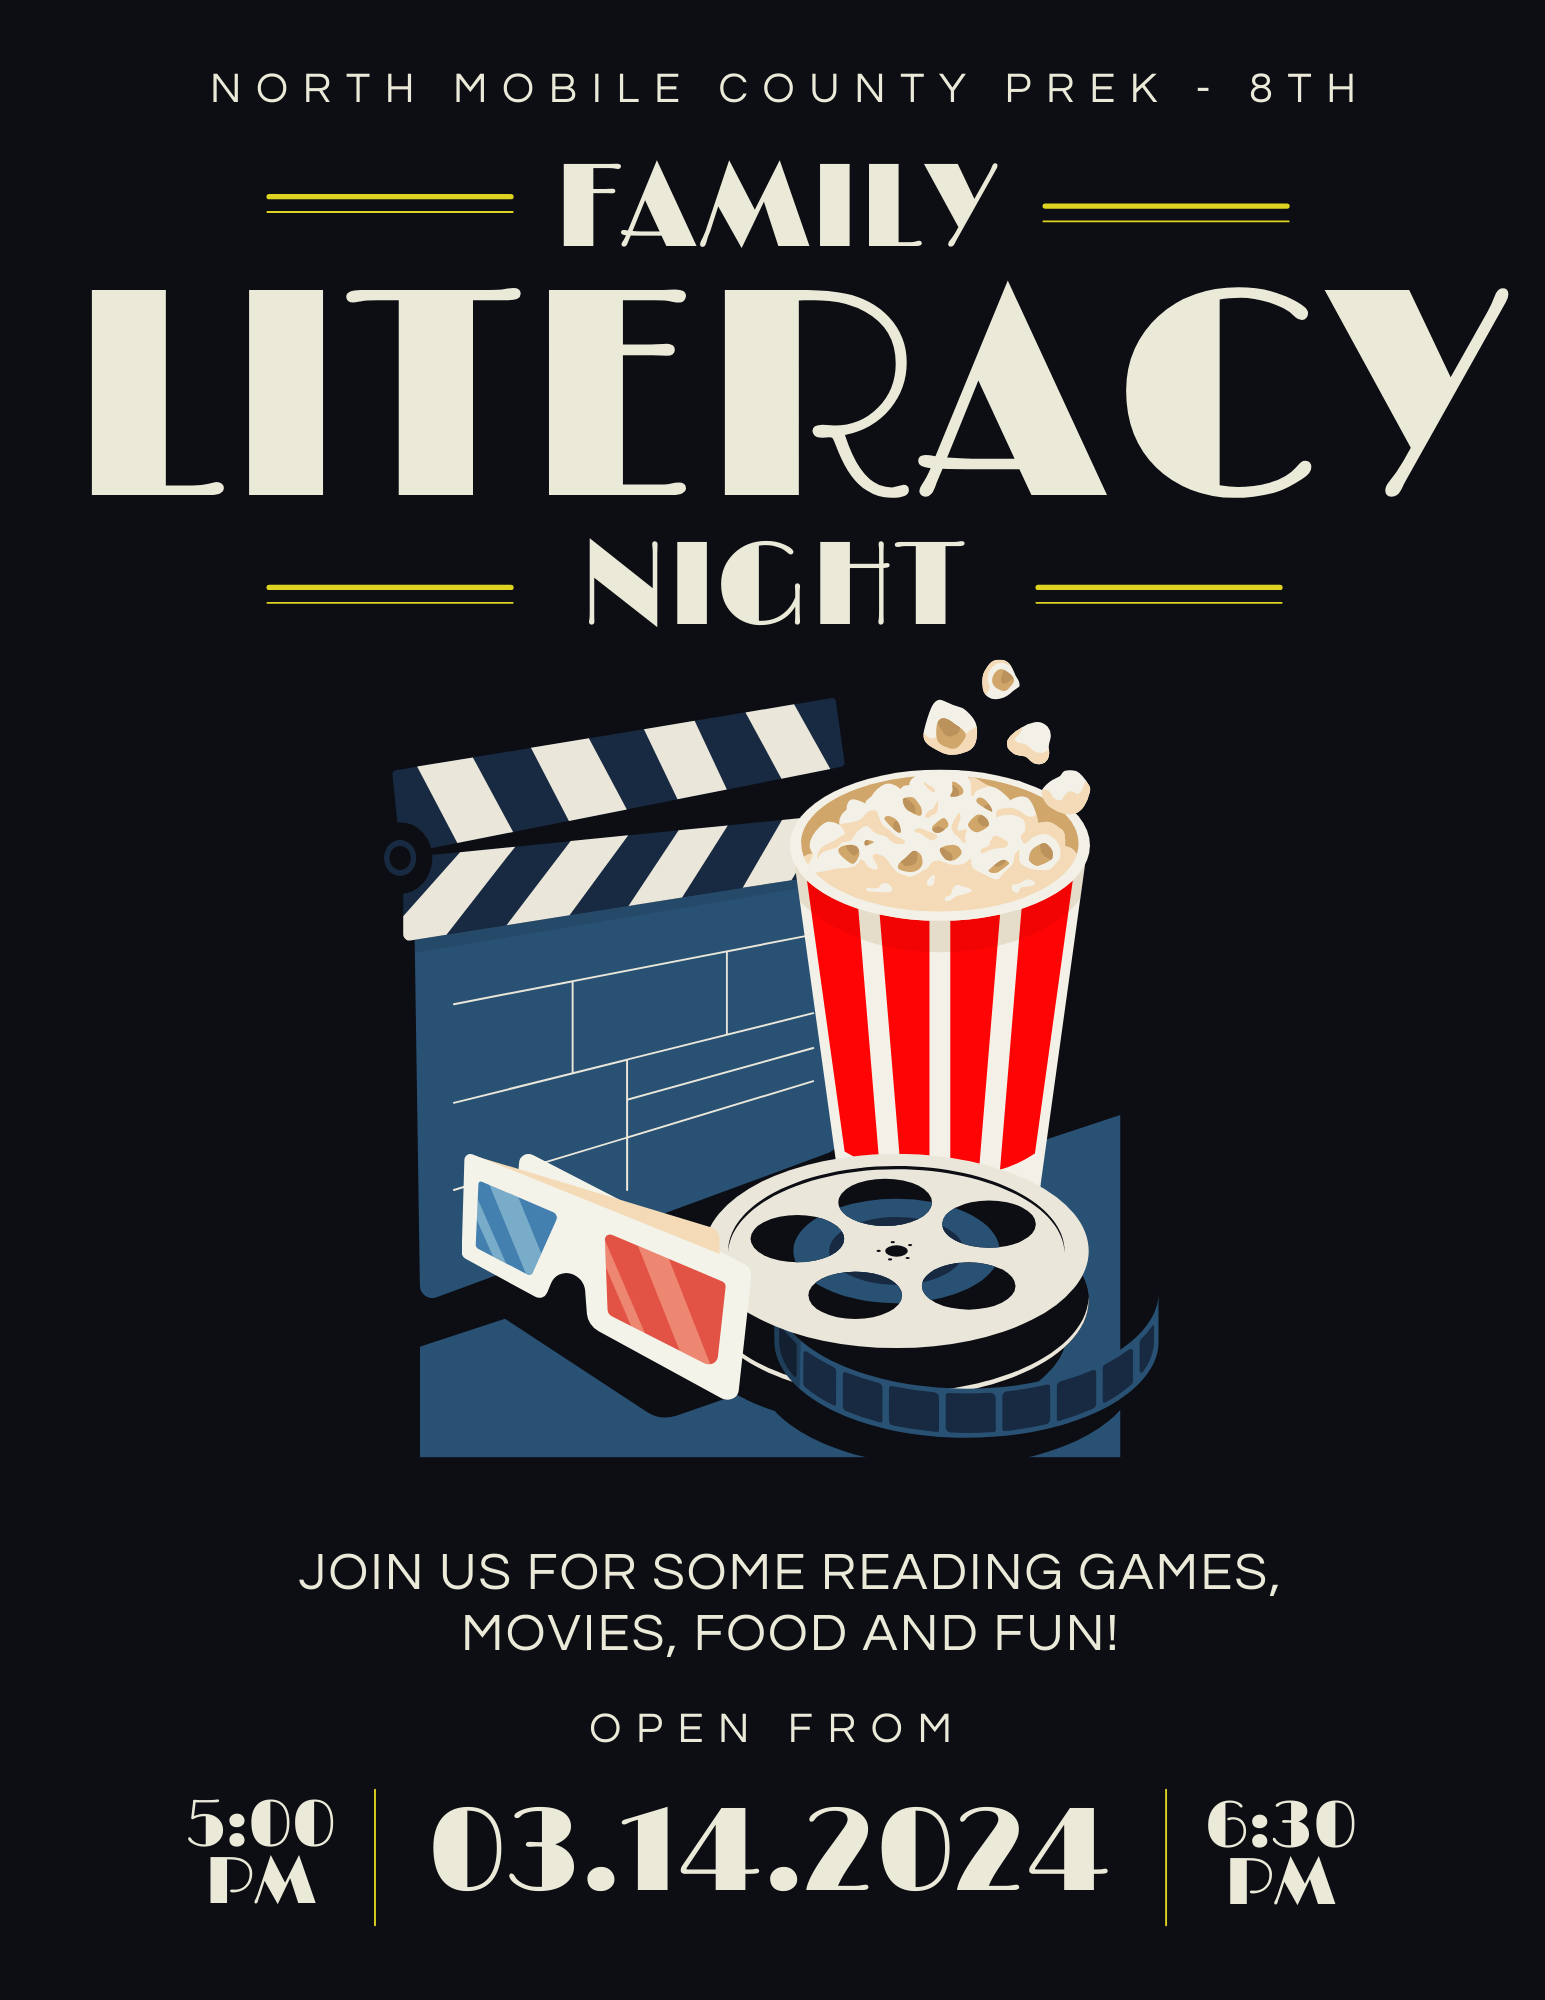 Literacy Night Flyer  Family Literacy Night March 14, 2024 Join us for reading games, movies, food and fun